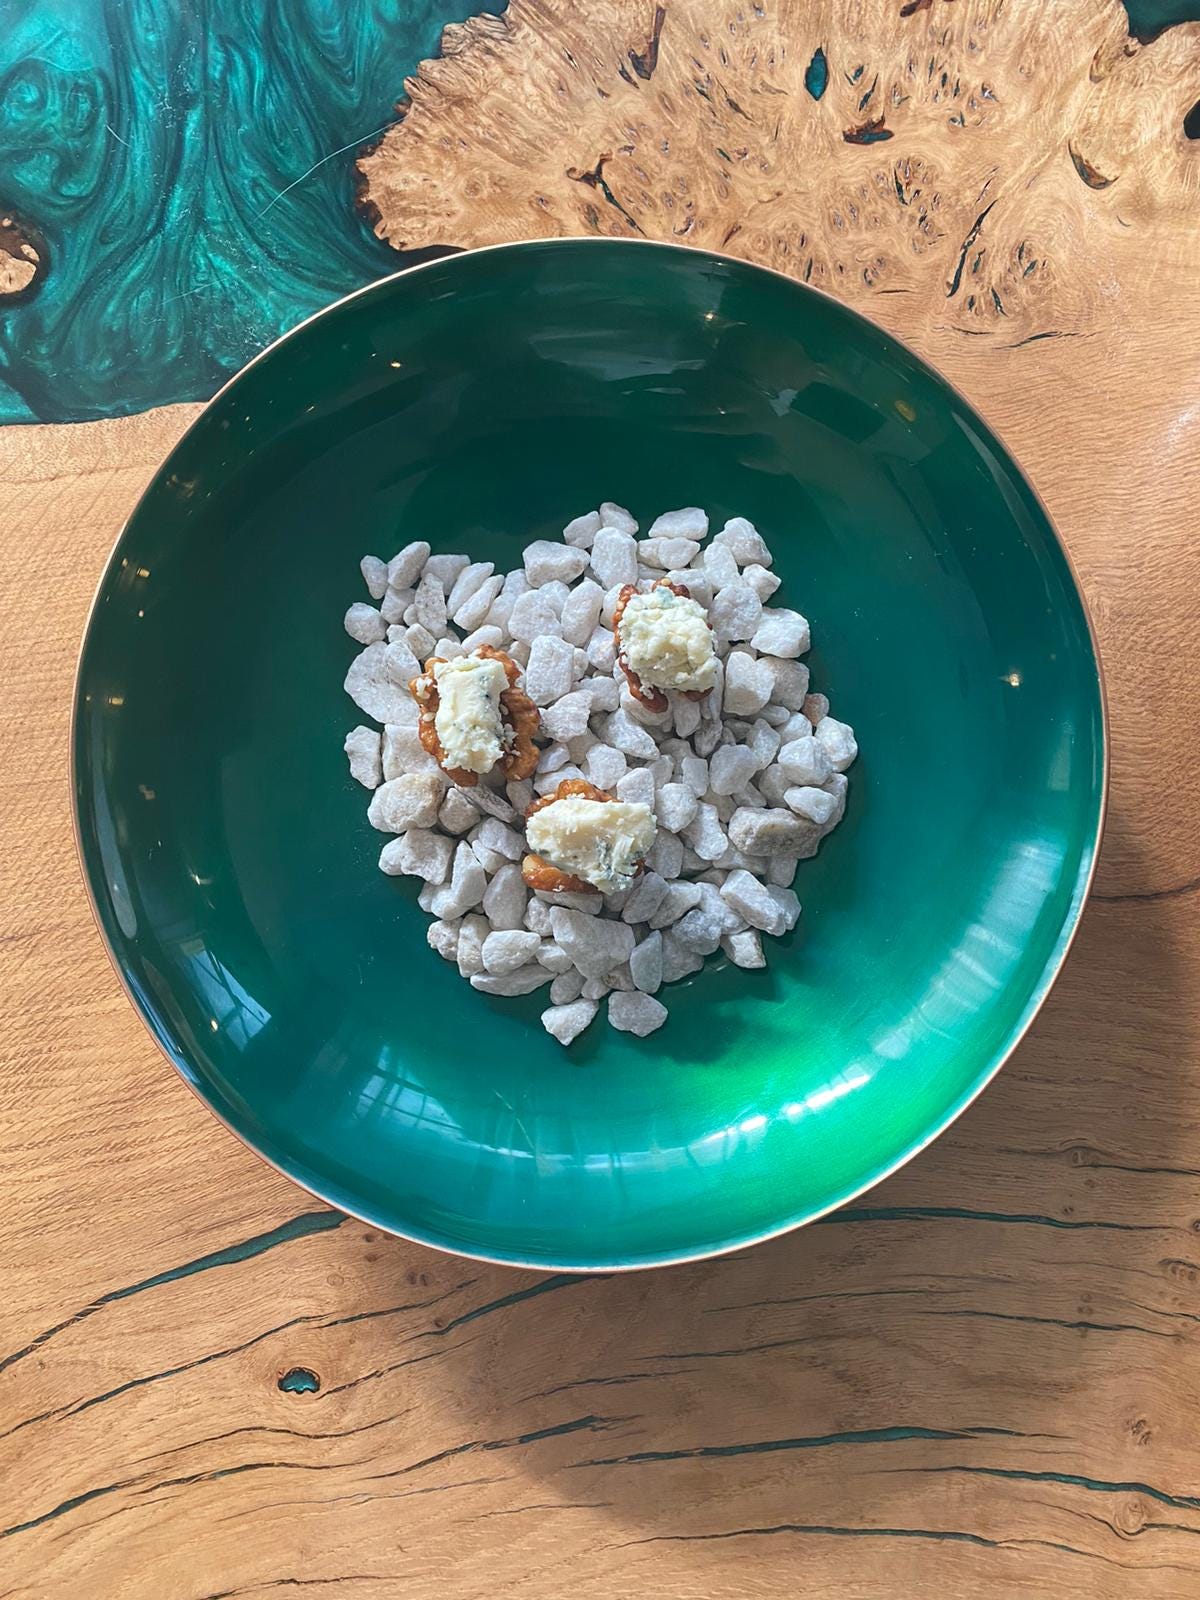 an overhead image of a round turquoise dish in the middle of which is a pile of a small grey stones - on top of the stones sits three walnuts, evenly spaced, with a dollop of cheese on top.